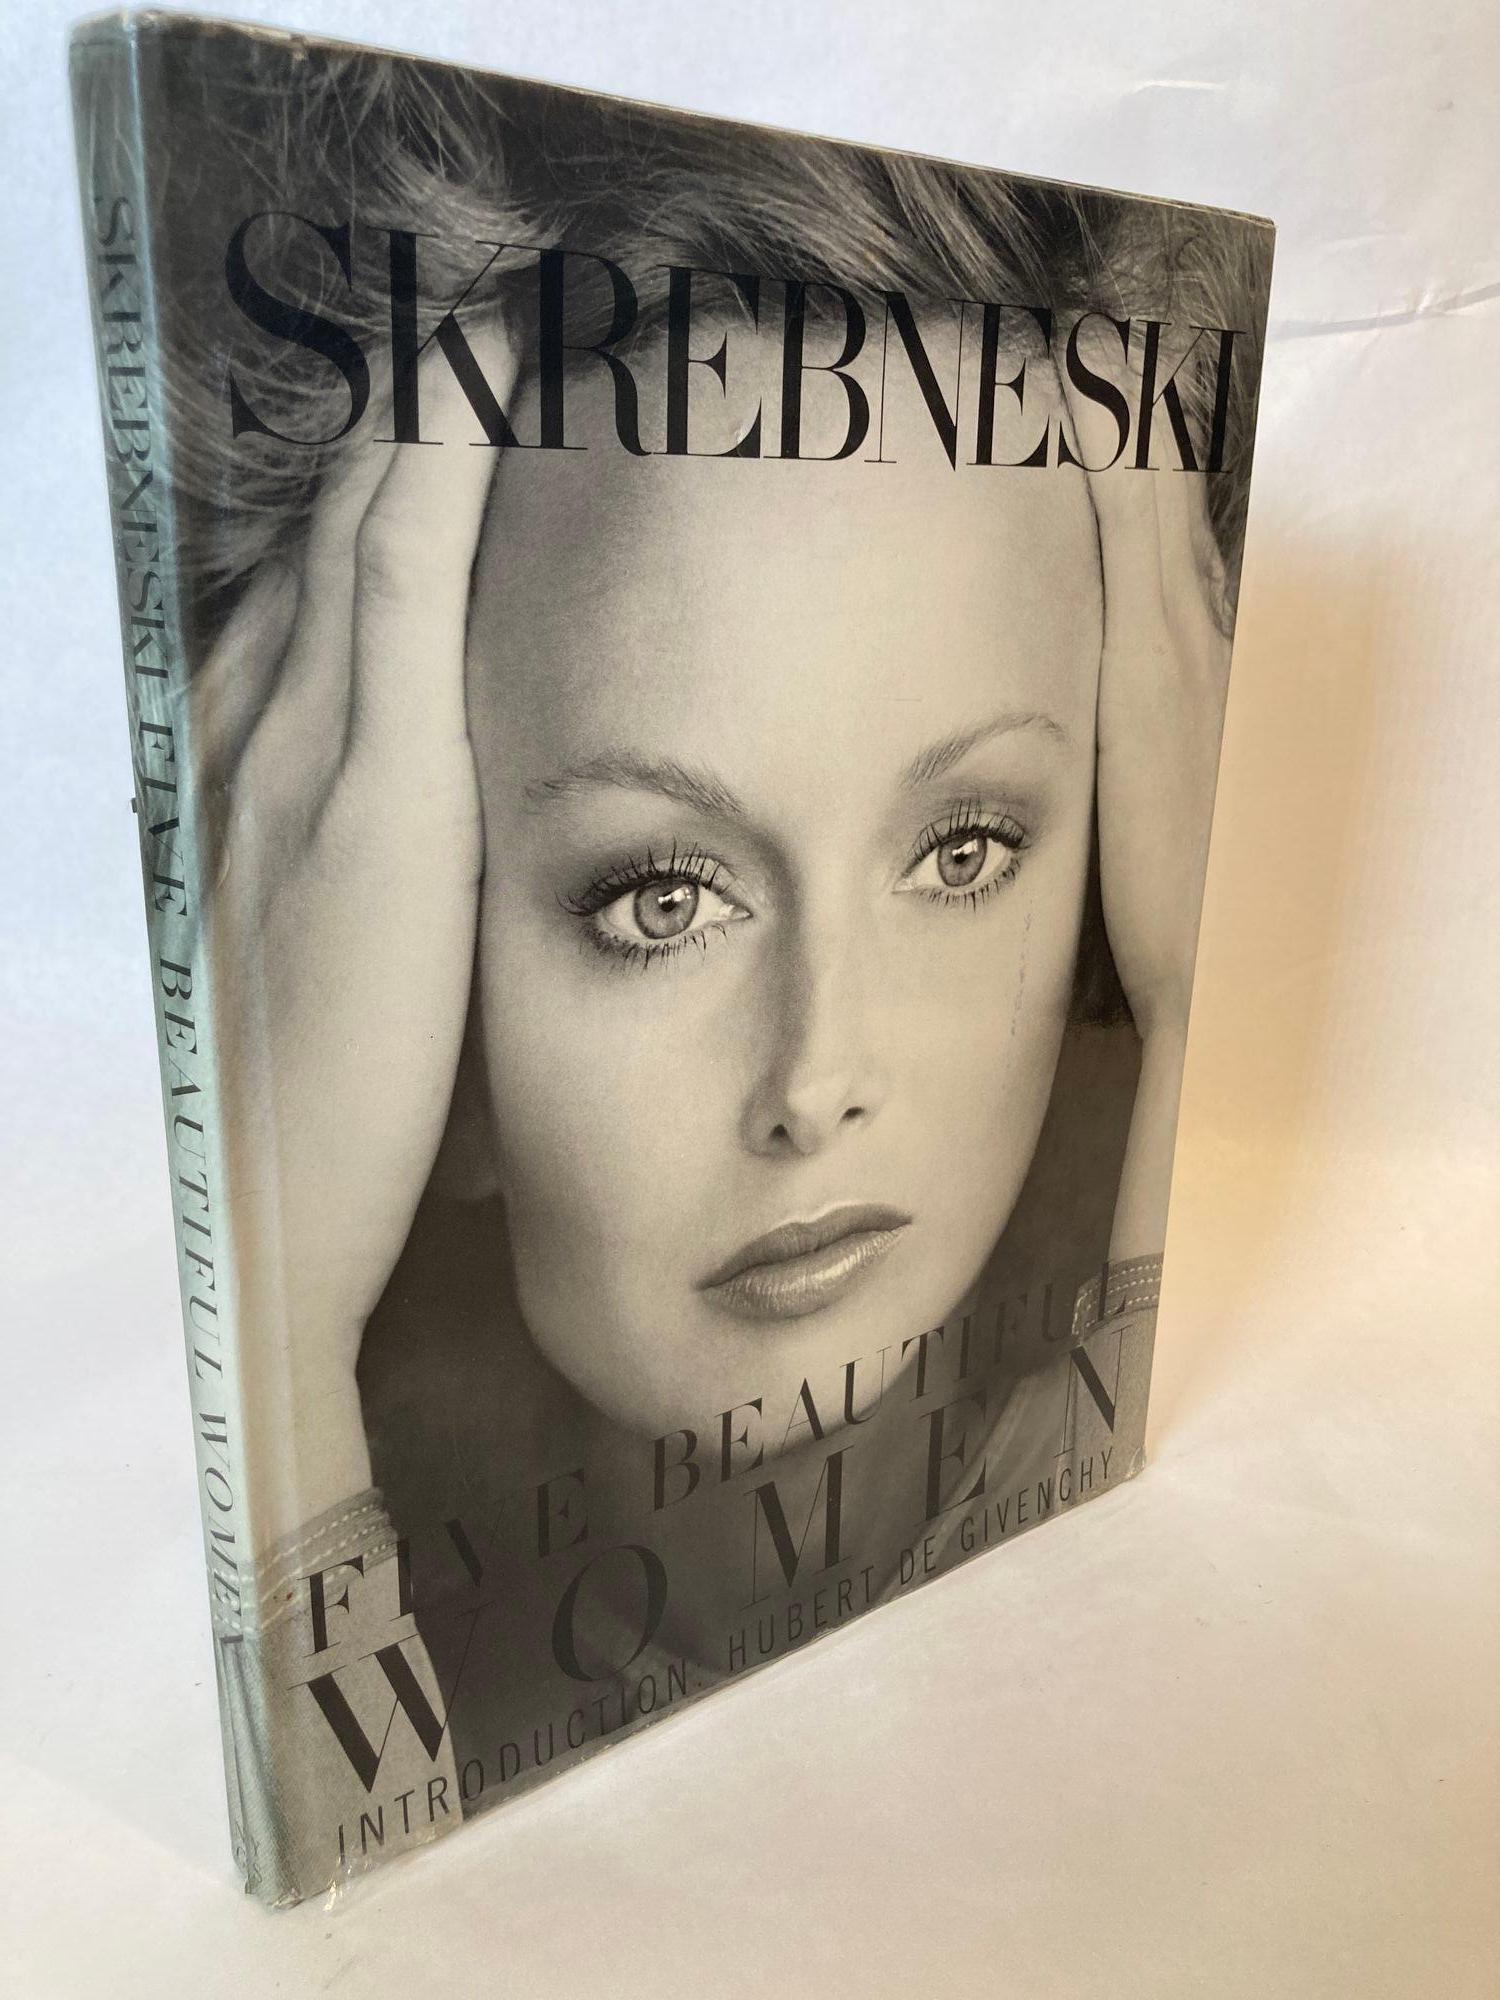 Five Beautiful Women Hardcover – February 19, 2008 by Victor Skrebneski (Author), Hubert de Givenchy (Introduction).
Victor Skrebneski is celebrated as one of the world’s finest fashion and portrait photographers. His diverse body of work has won